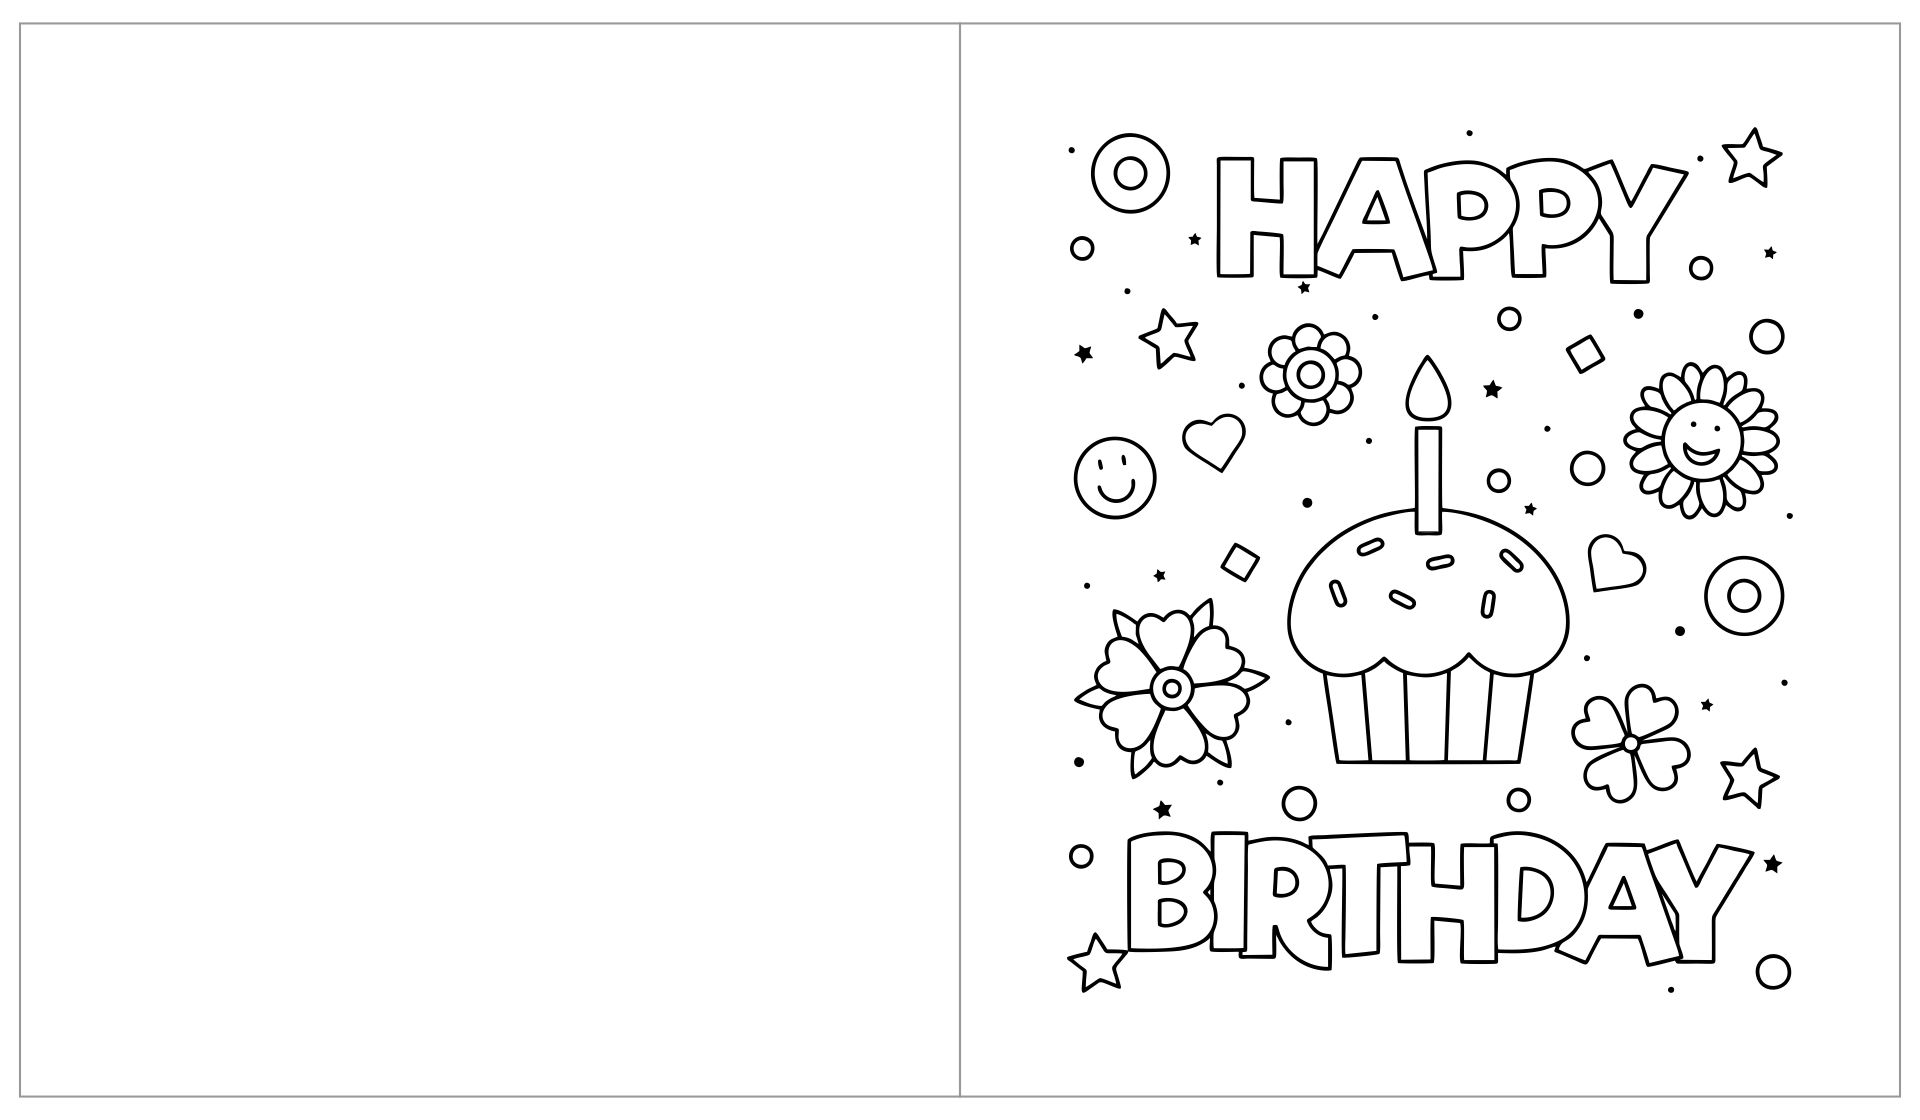 20 printable birthday cards to color parade - 10 best printable birthday cards to color pdf for free at printablee | birthday cards printable to color